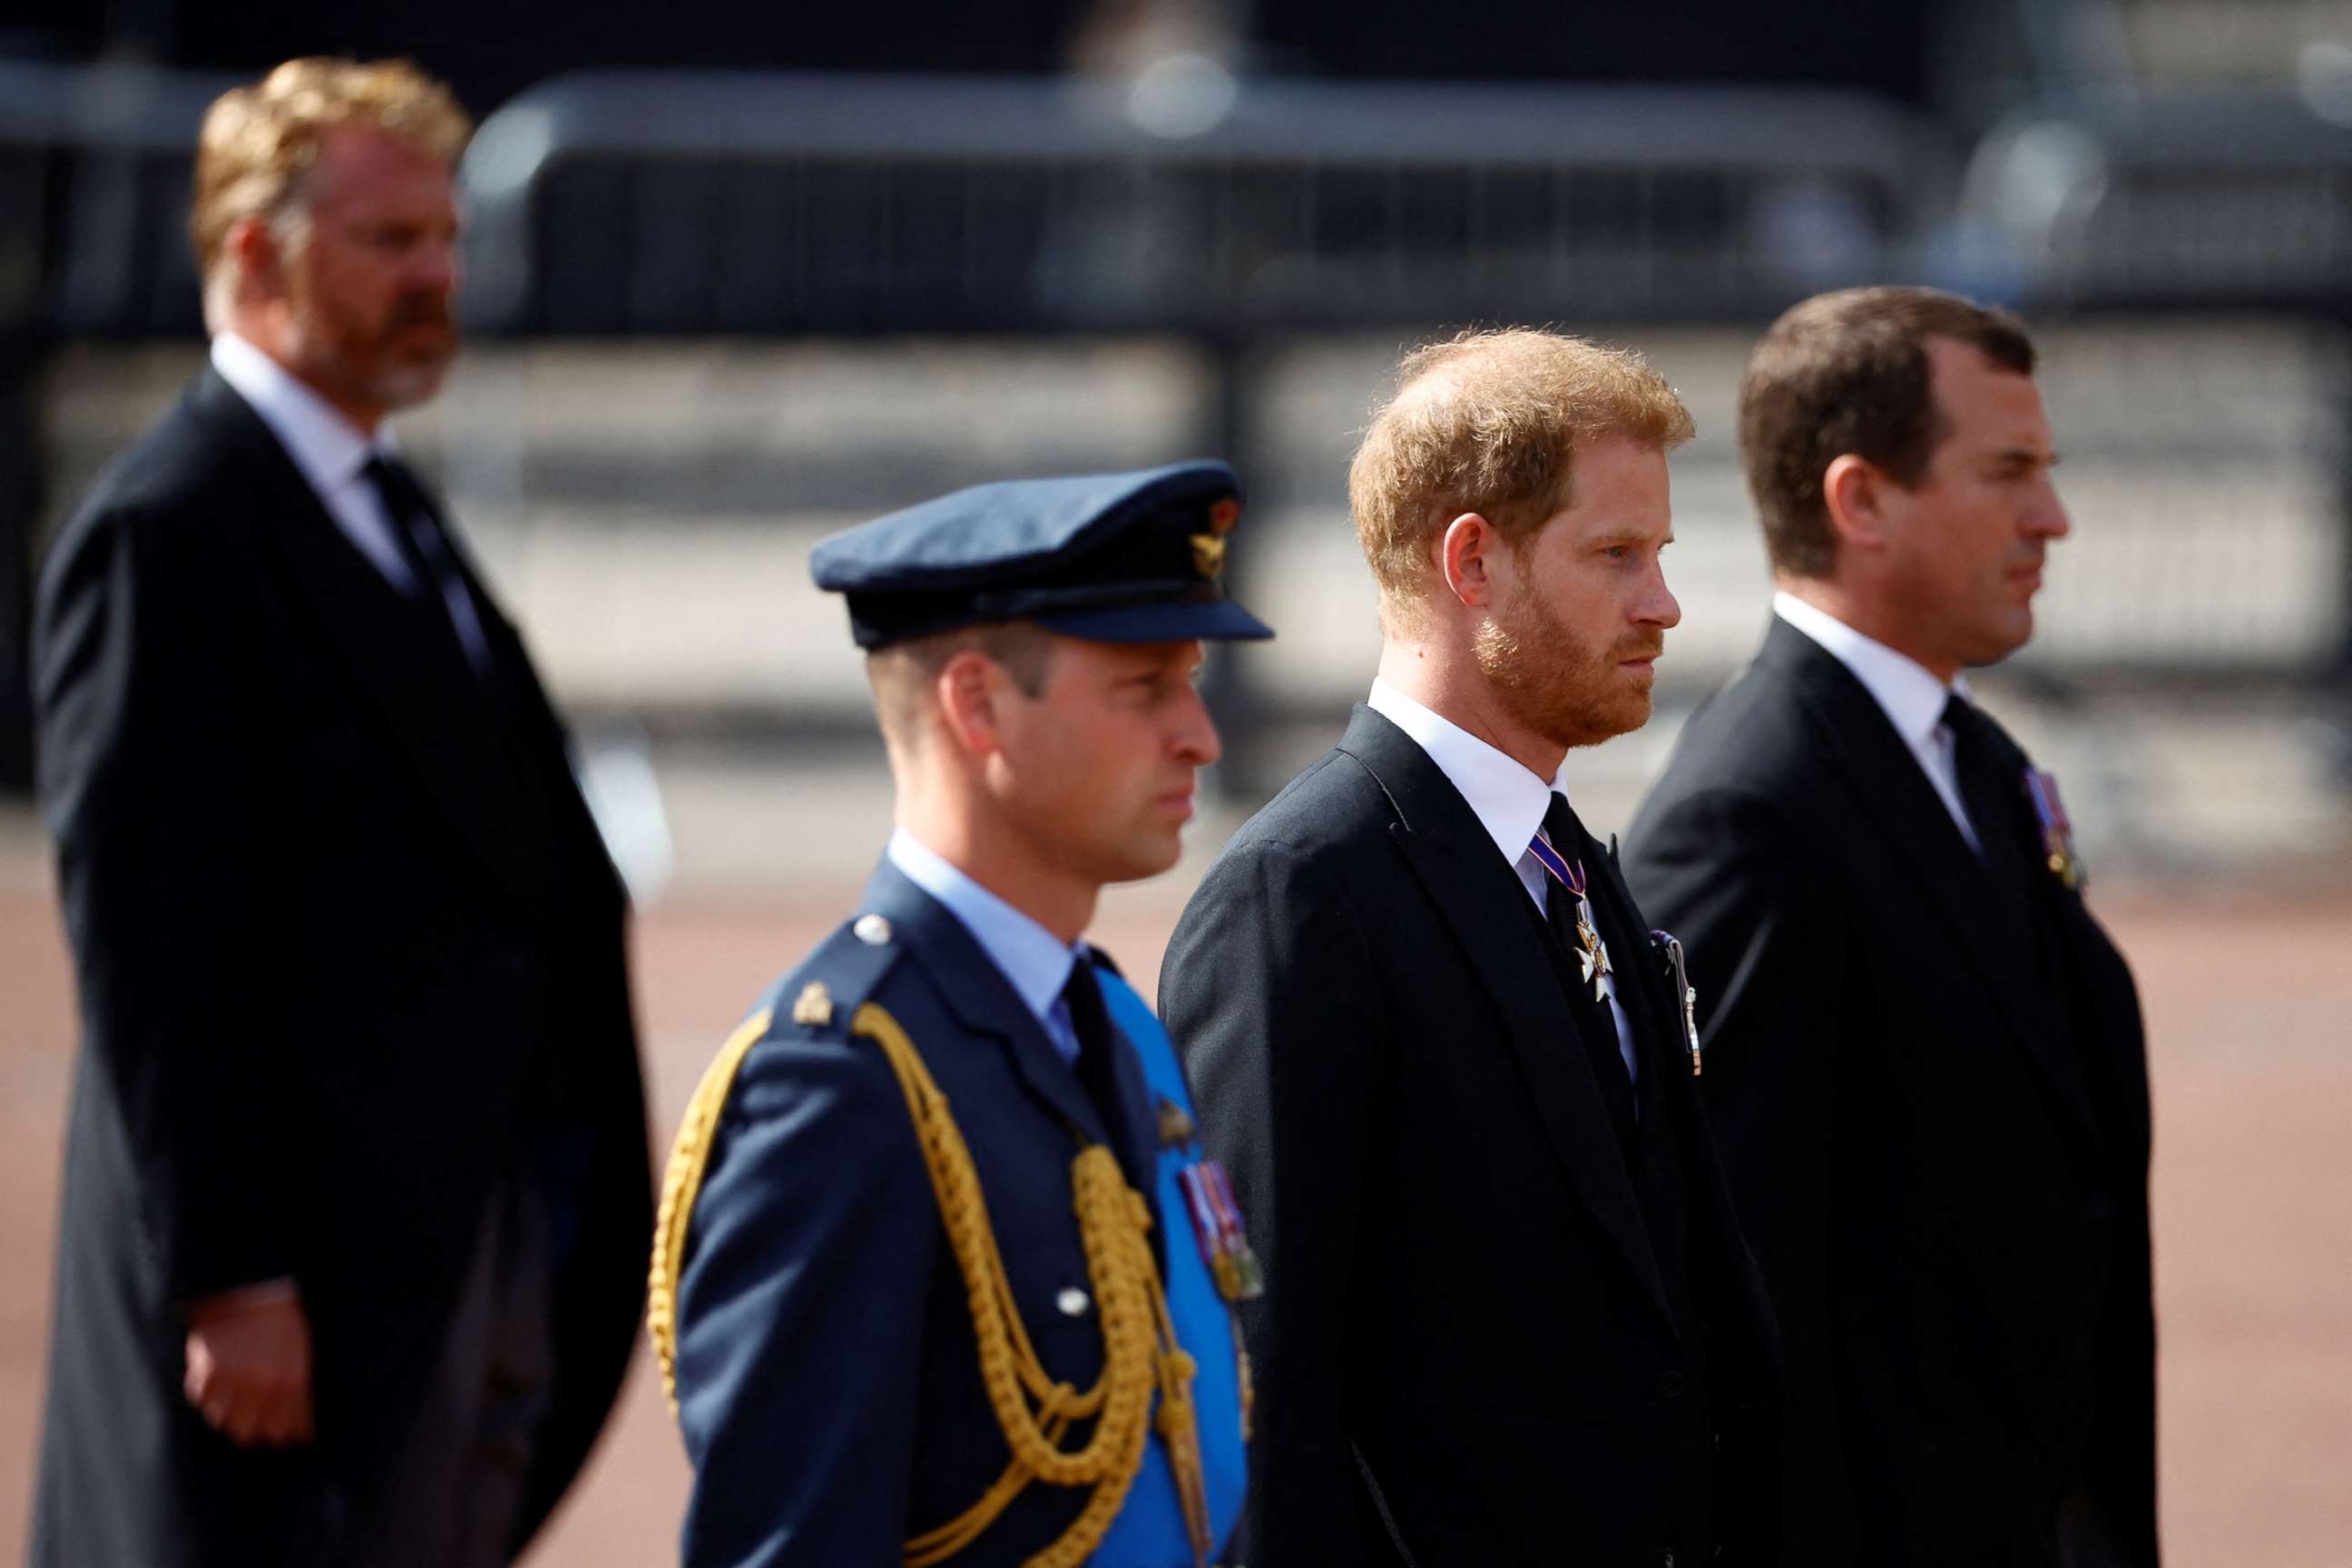 PHOTO: William, Prince of Wales and Prince Harry march during a procession where the coffin of Britain's Queen Elizabeth is transported from Buckingham Palace to the Houses of Parliament for her lying in state, in London, Sept. 14, 2022.